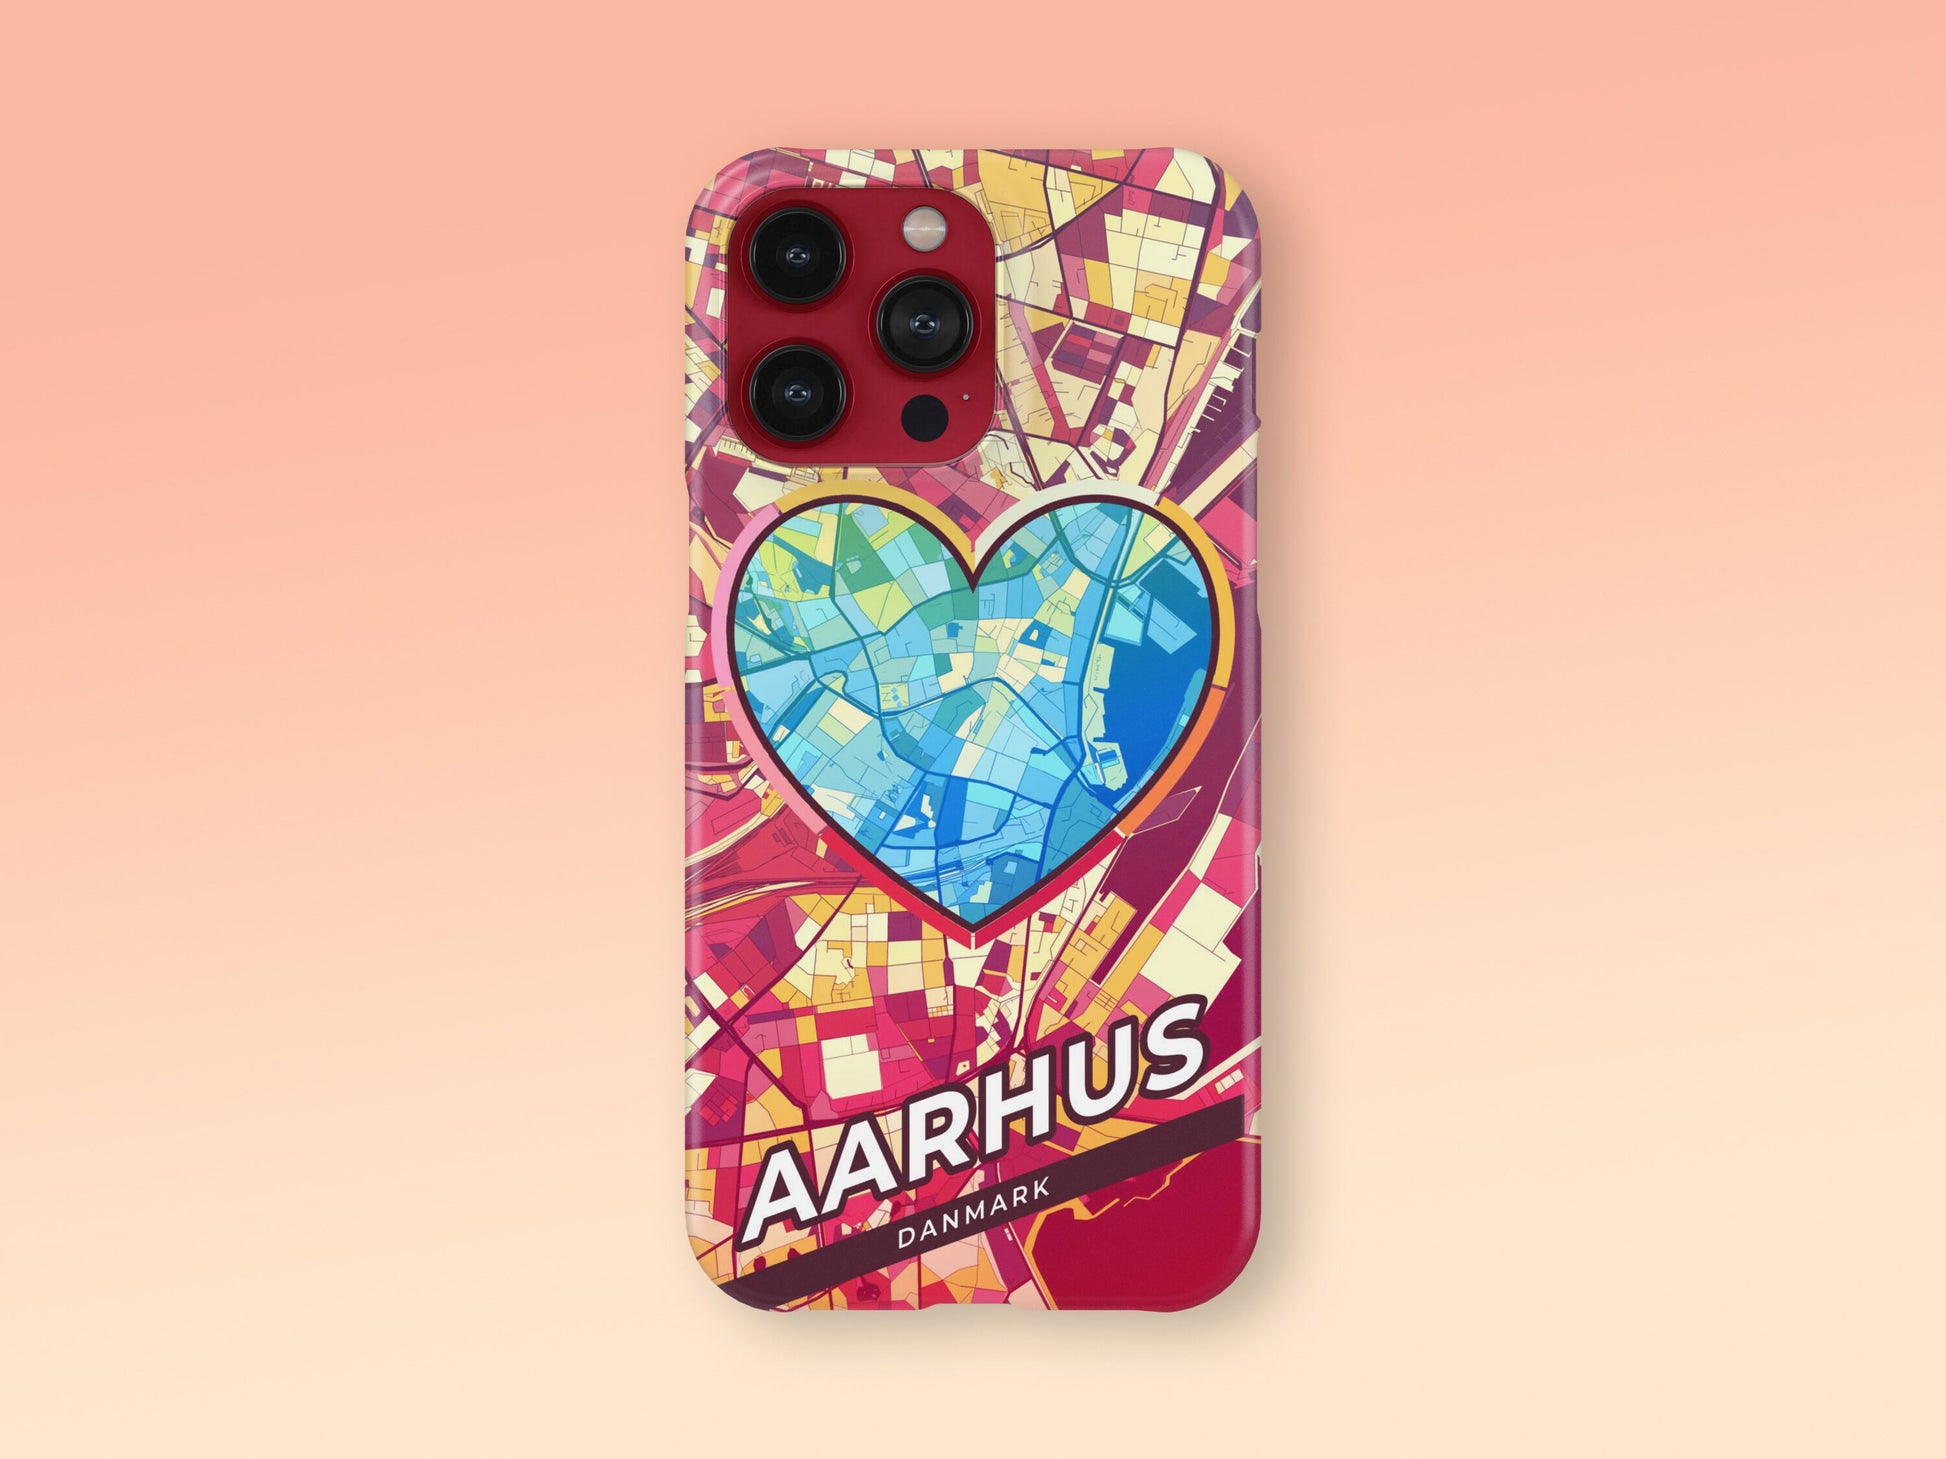 Aarhus Danmark slim phone case with colorful icon. Birthday, wedding or housewarming gift. Couple match cases. 2